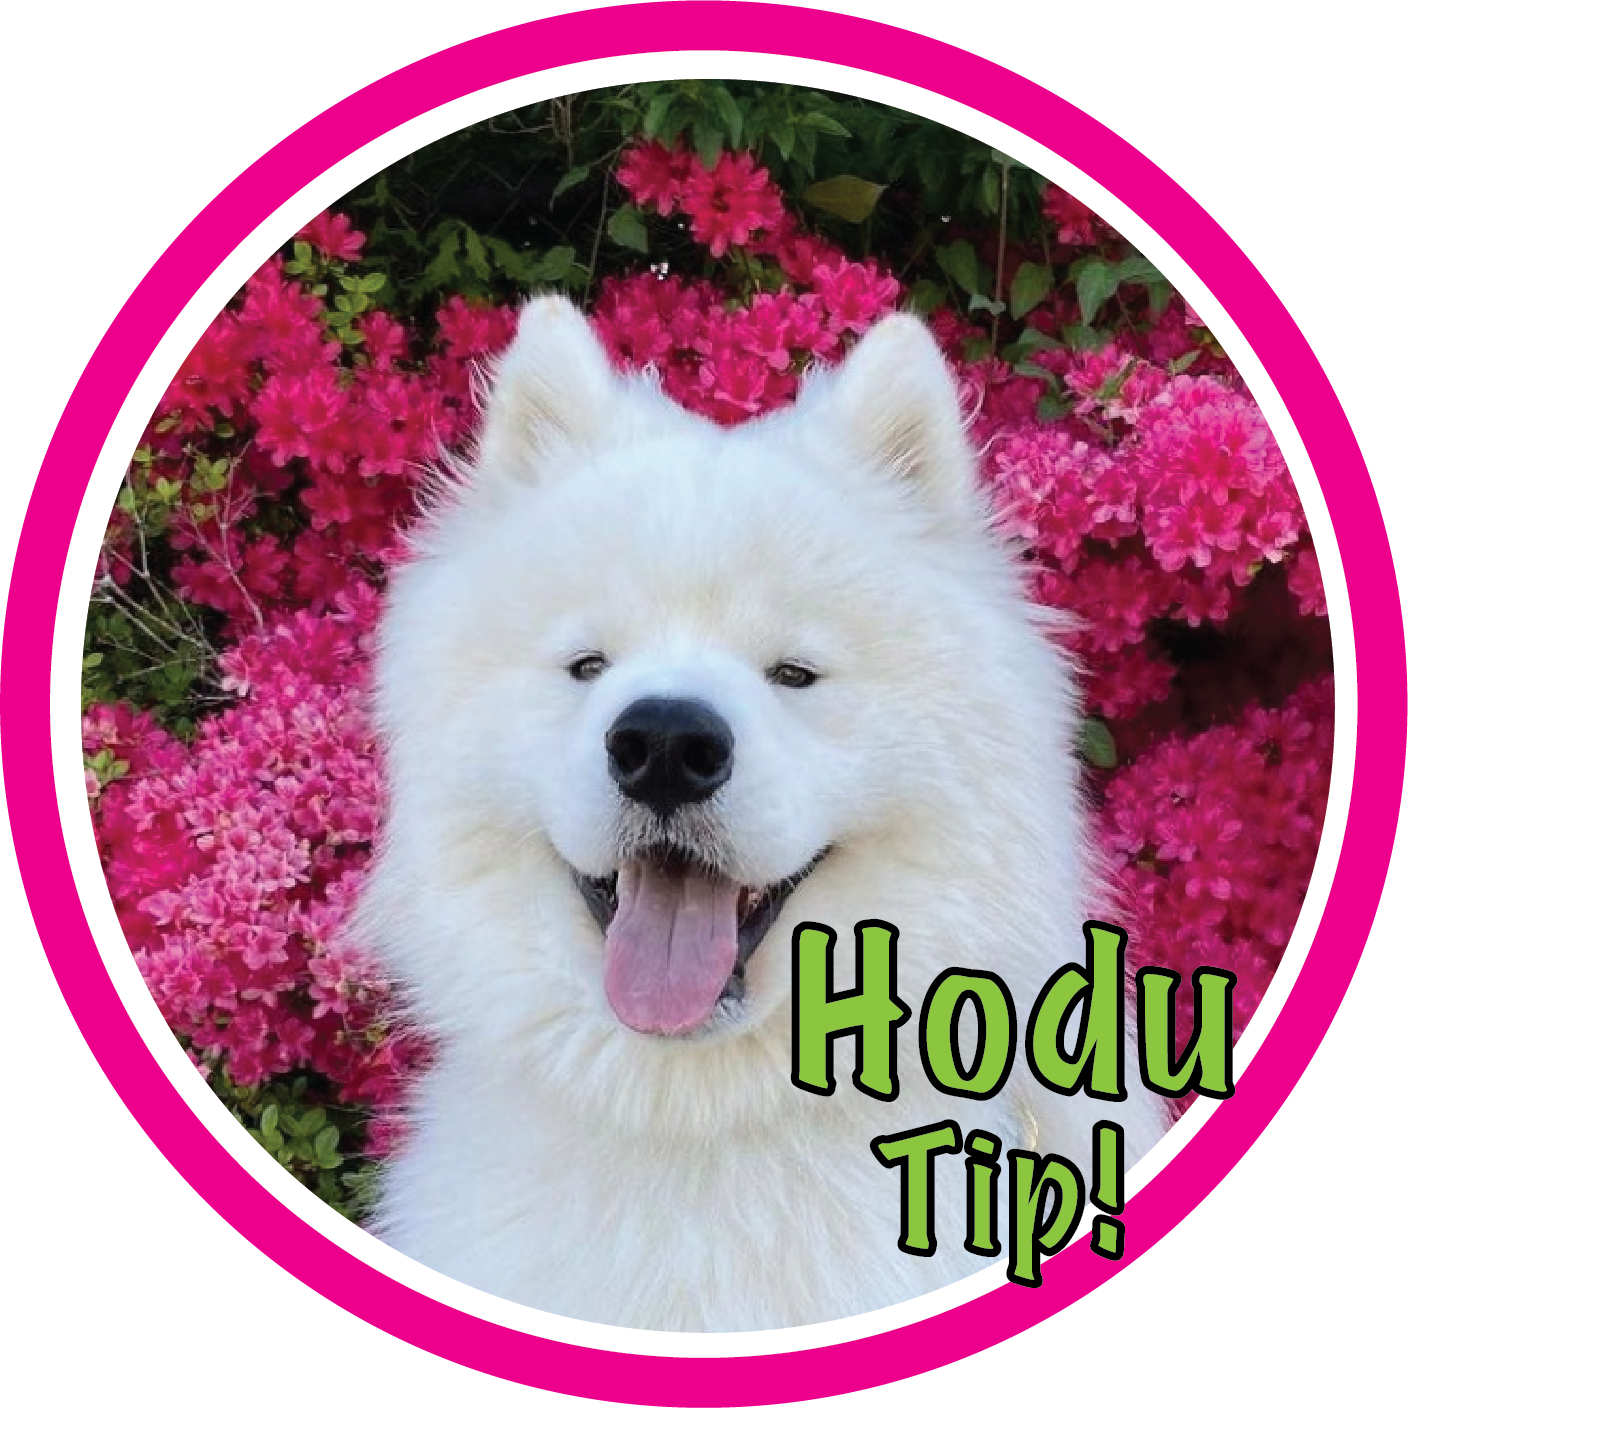 Hodu Tip! with magenta color styling